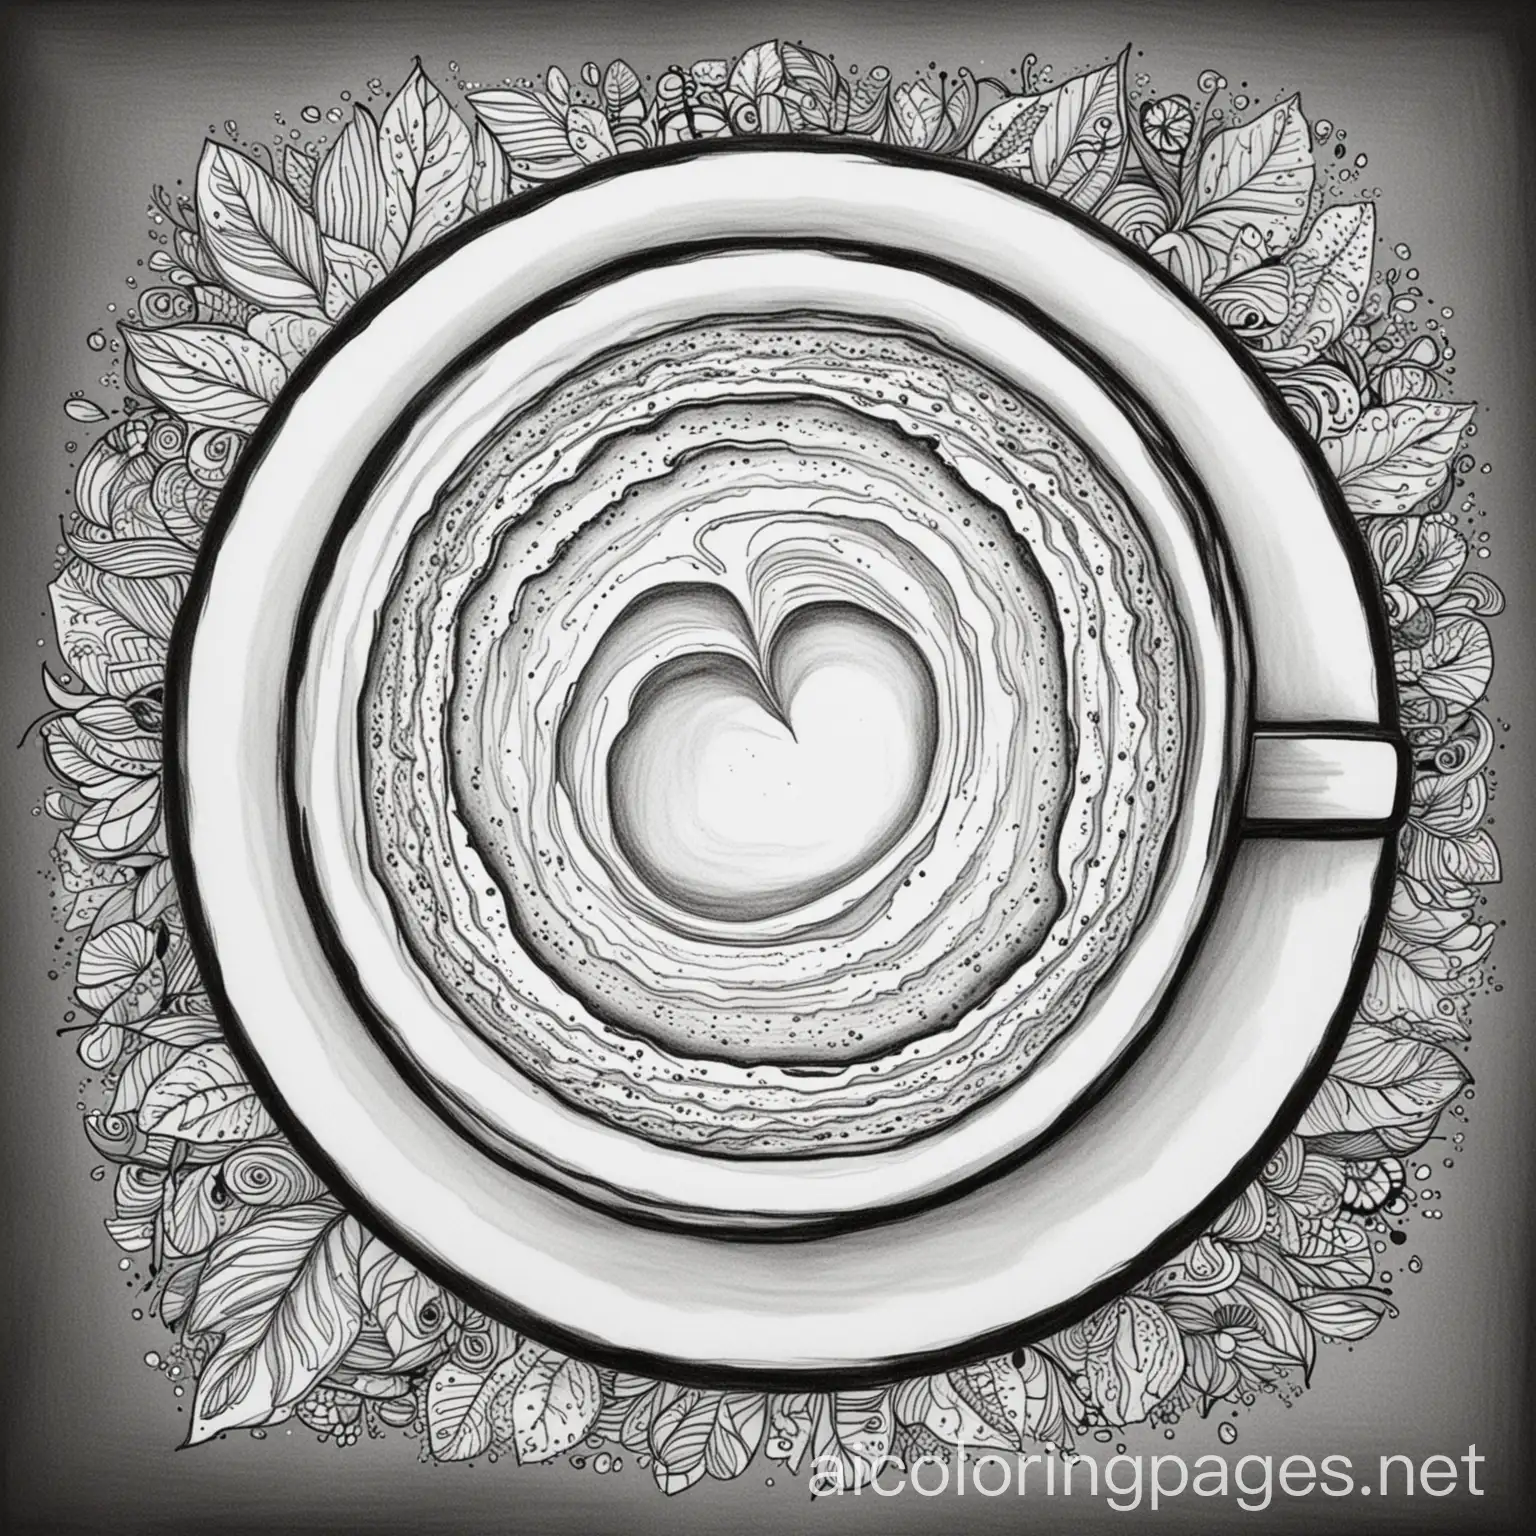 Cozy-Coffee-Cup-Coloring-Page-with-Beautiful-Coffee-Art